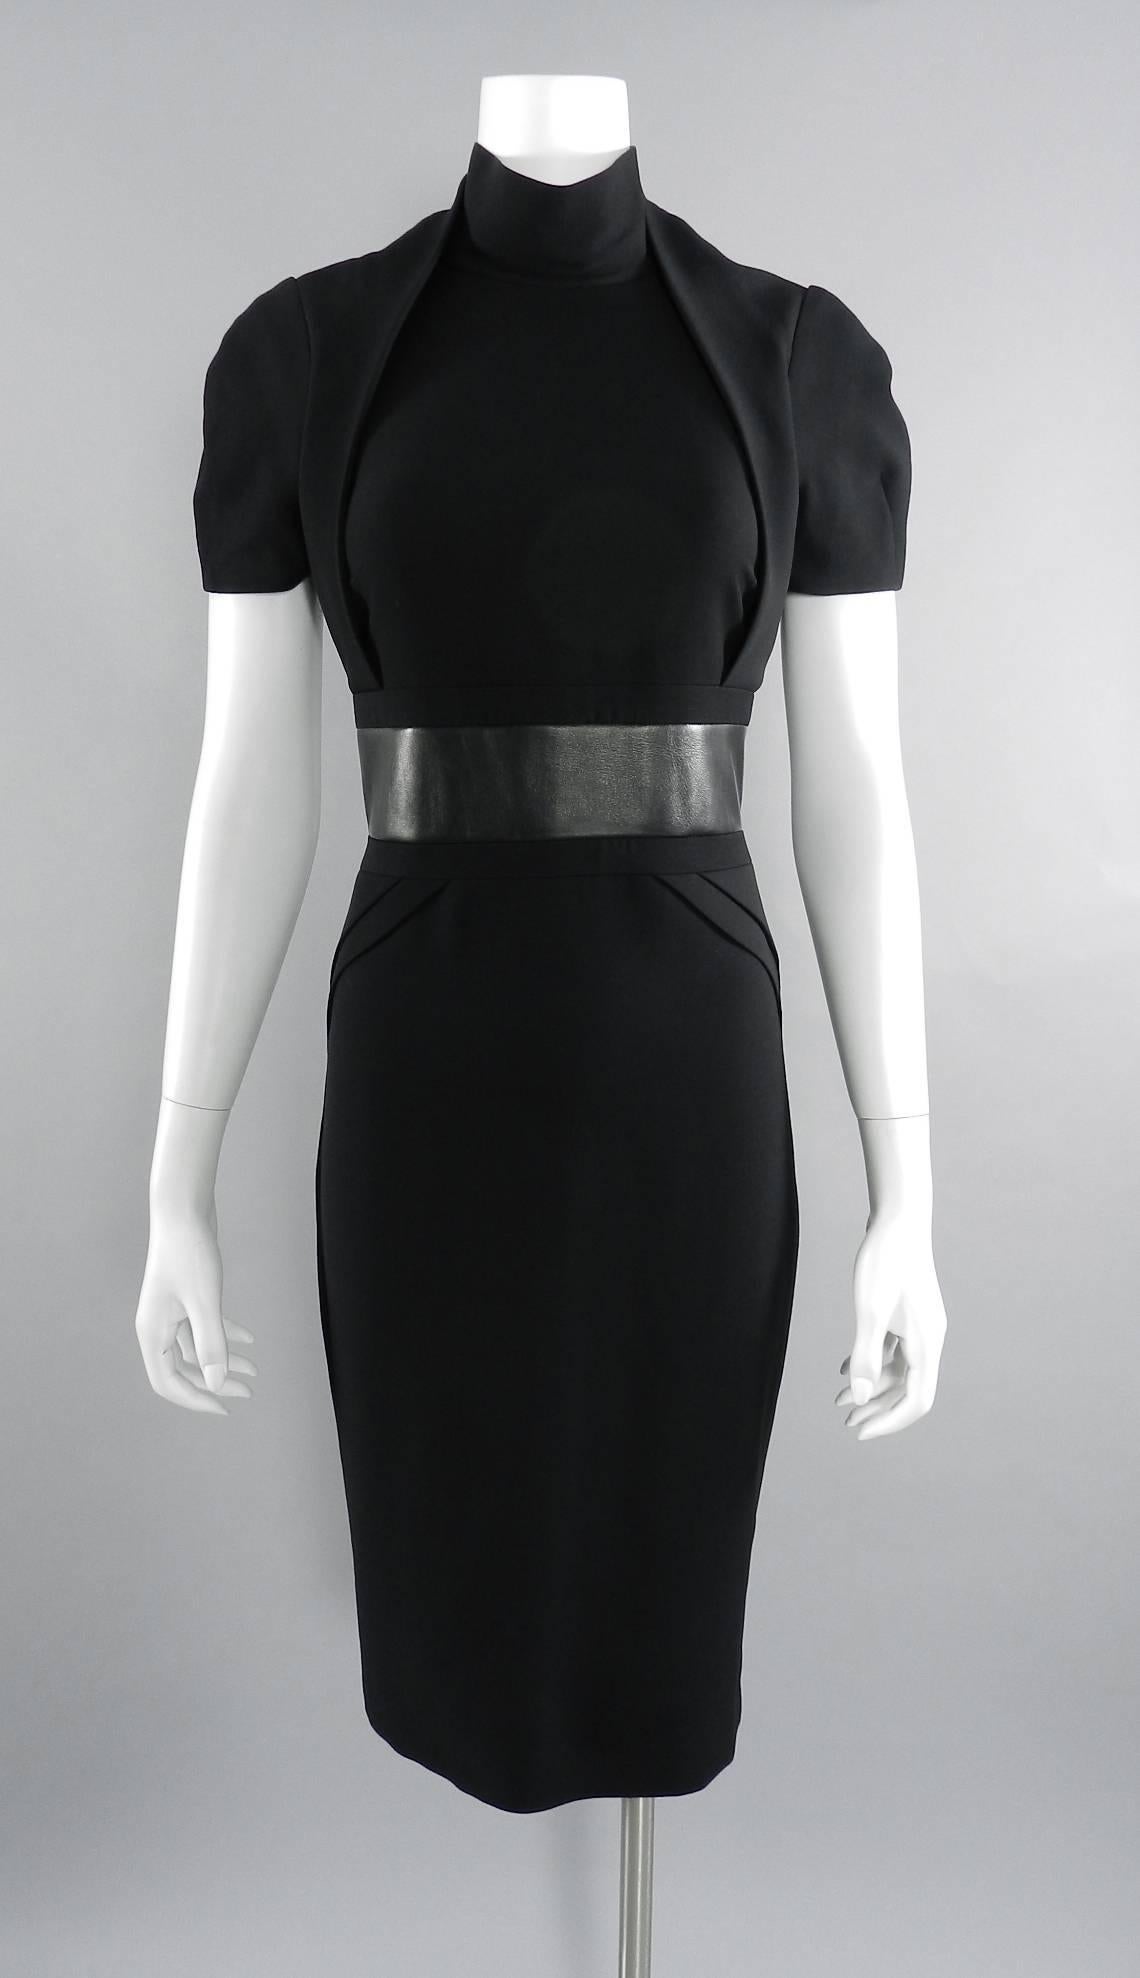 Gucci Fall 2013 runway Black Hourglass Dress with Leather Waist 4